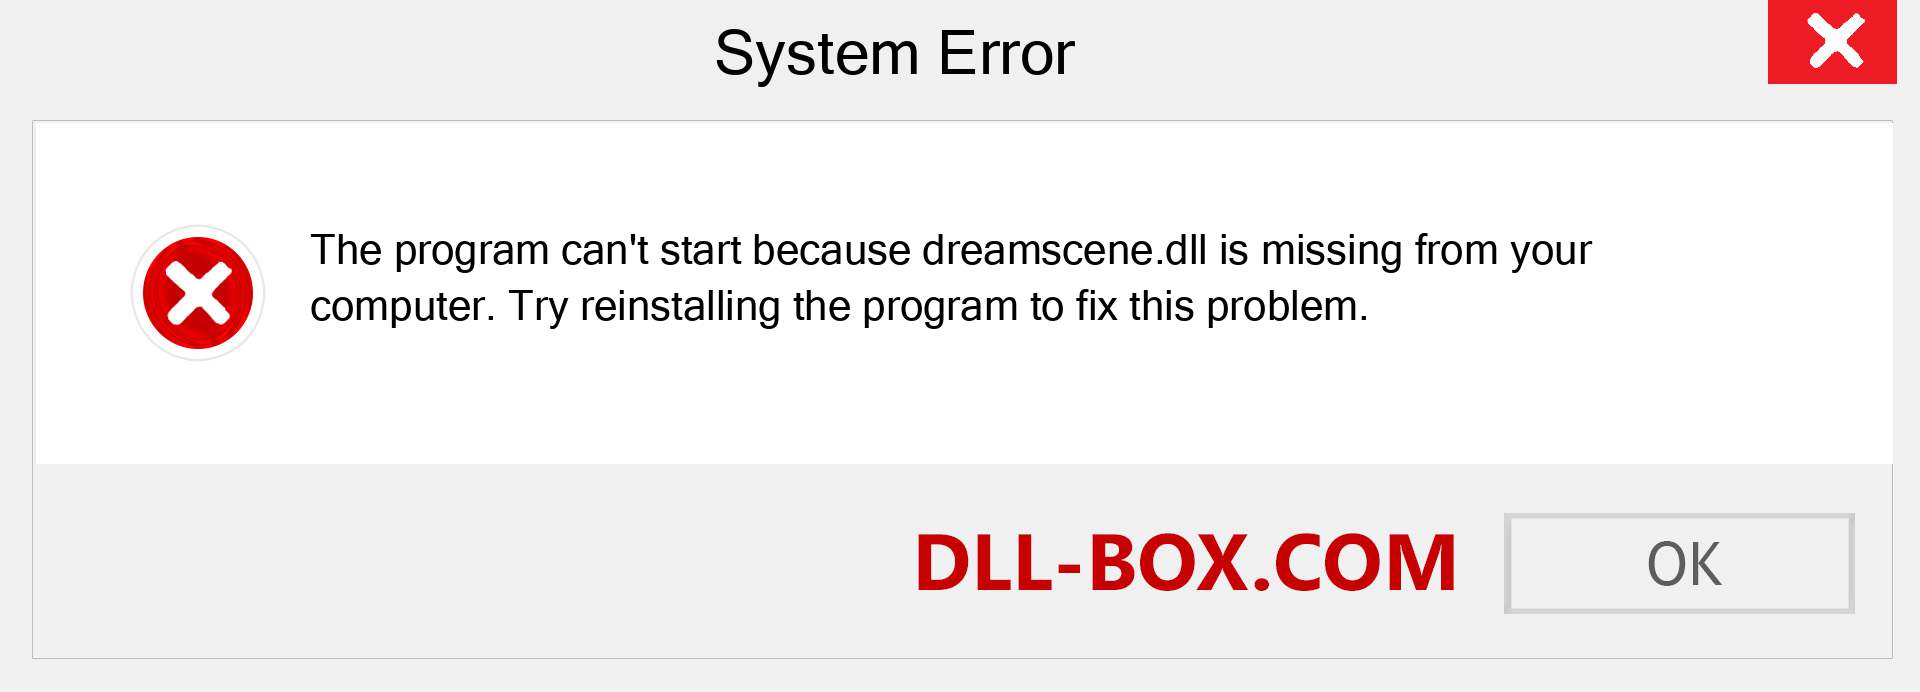  dreamscene.dll file is missing?. Download for Windows 7, 8, 10 - Fix  dreamscene dll Missing Error on Windows, photos, images